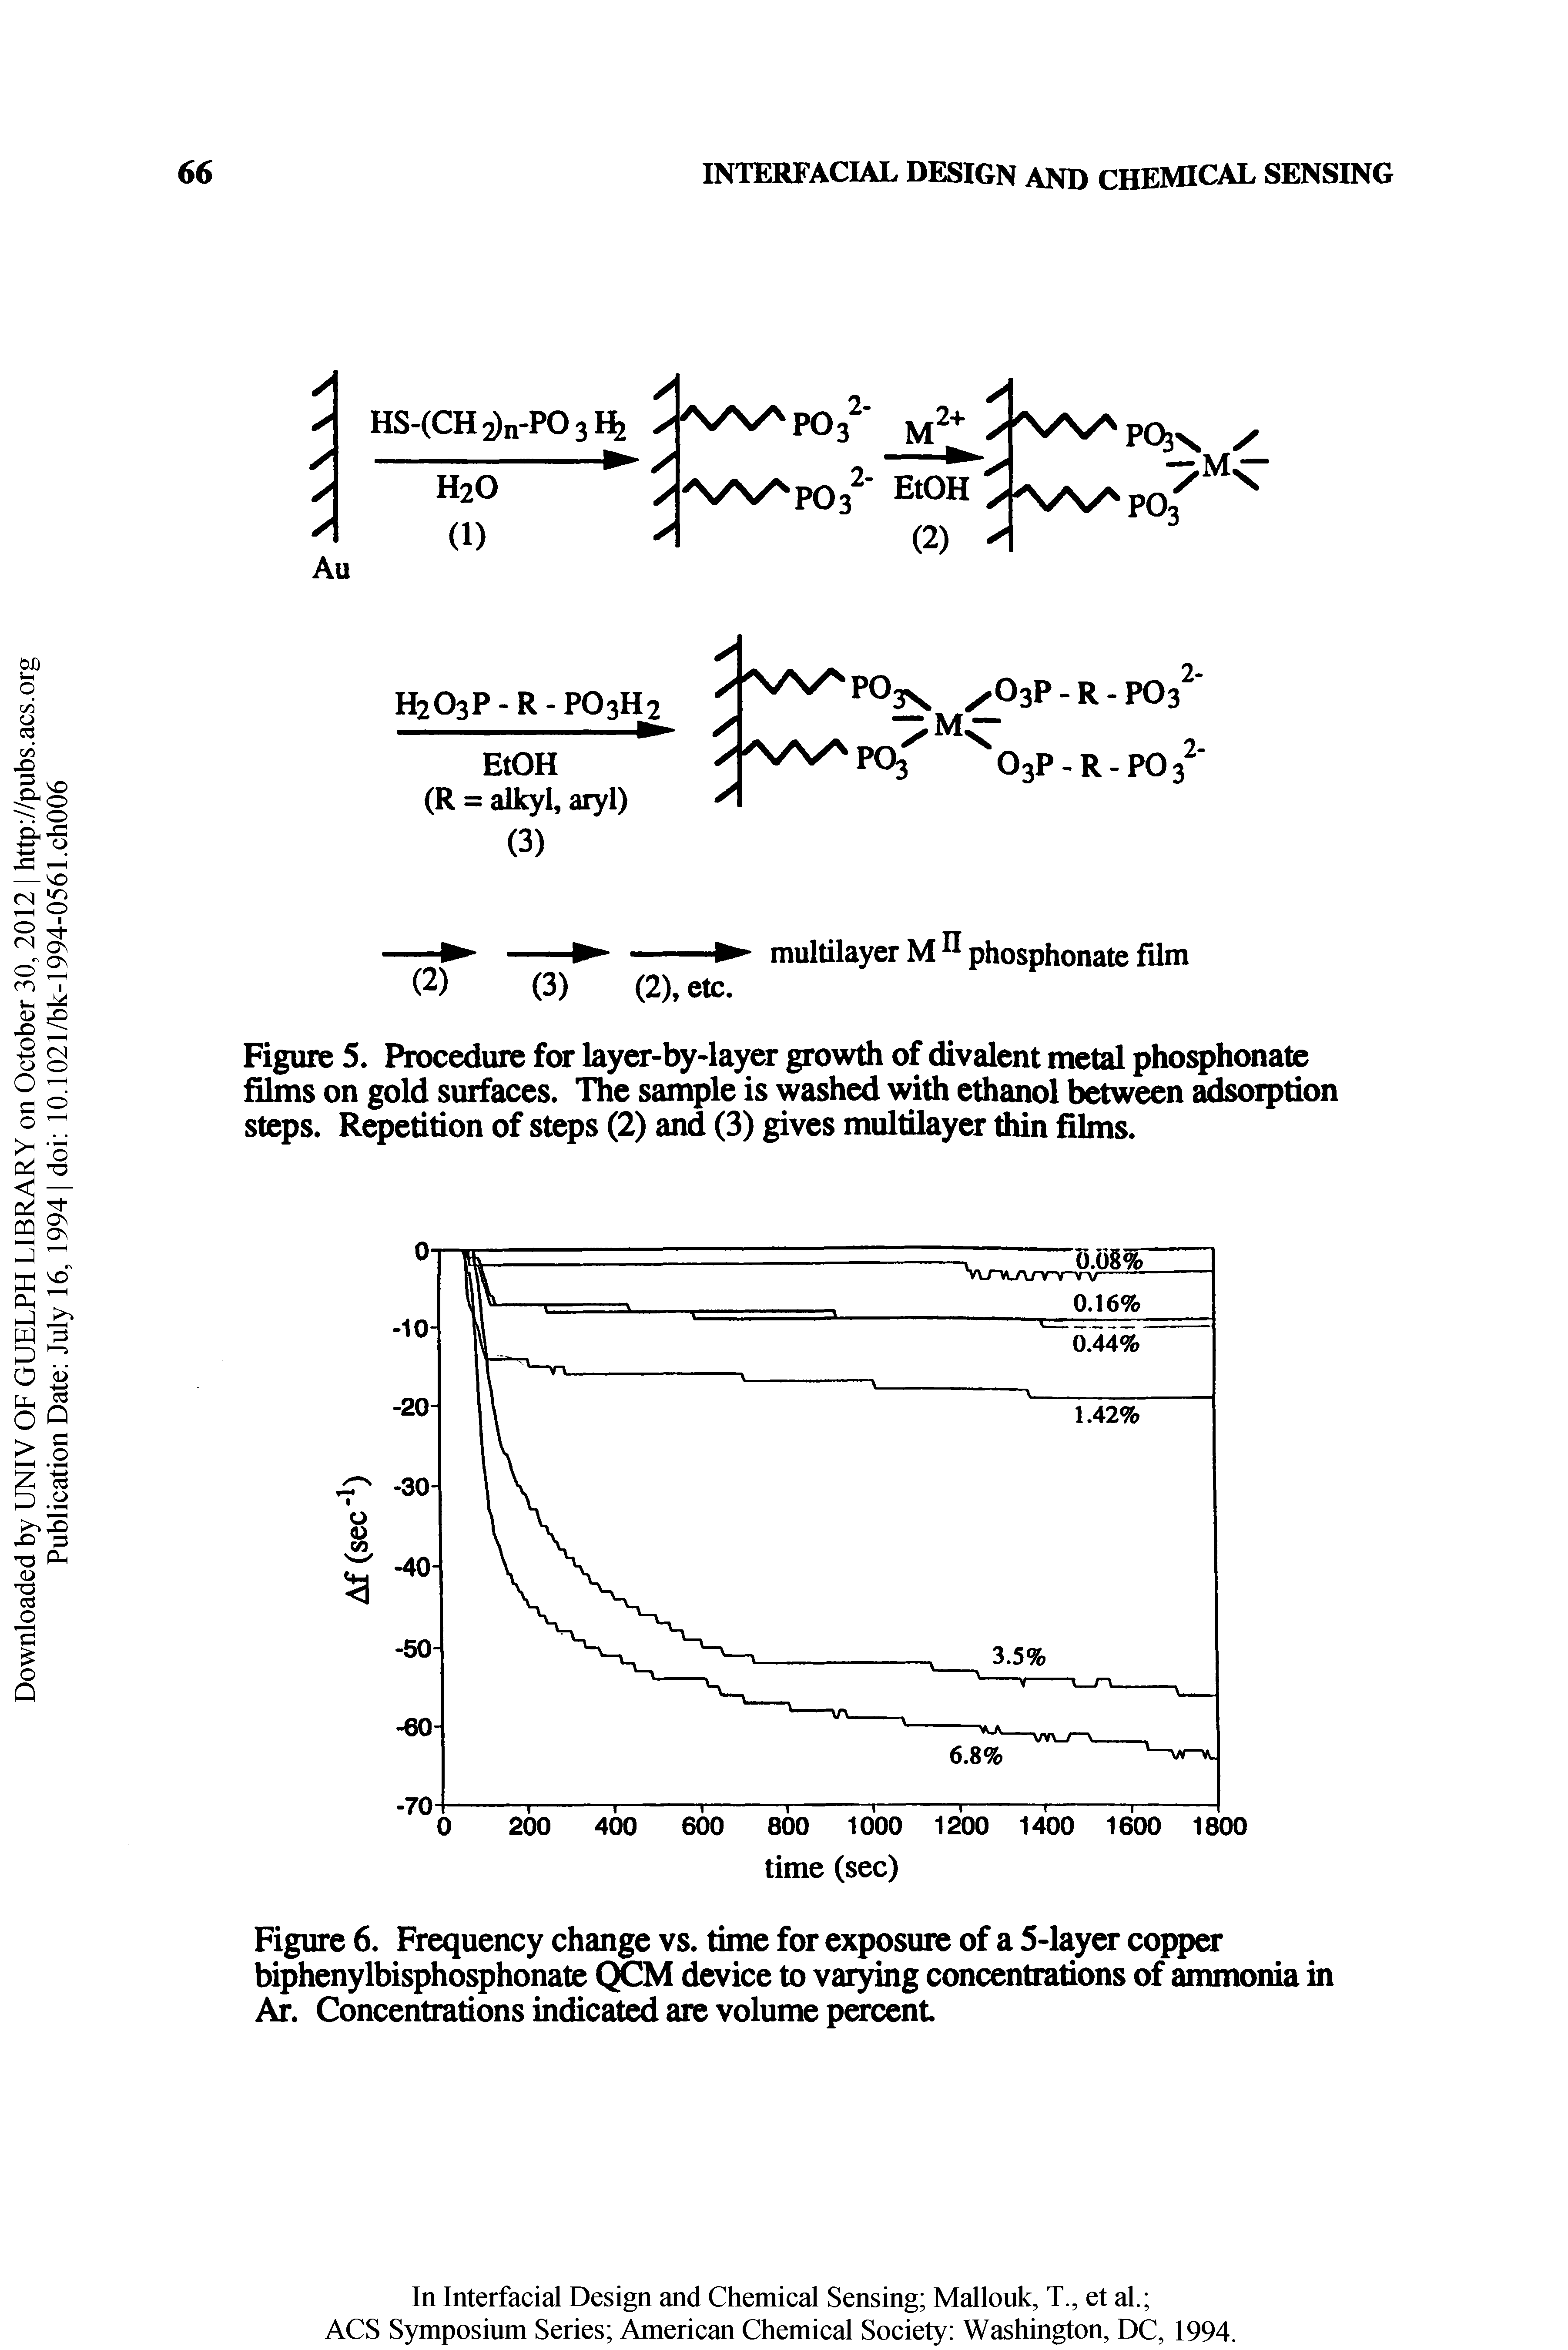 Figure 5. Procedure for layer-by-layer growth of divalent metal phosphonate films on gold surfaces. The sample is washed with ethanol between adsorption steps. Repetition of steps (2) and (3) gives multilayer thin films.